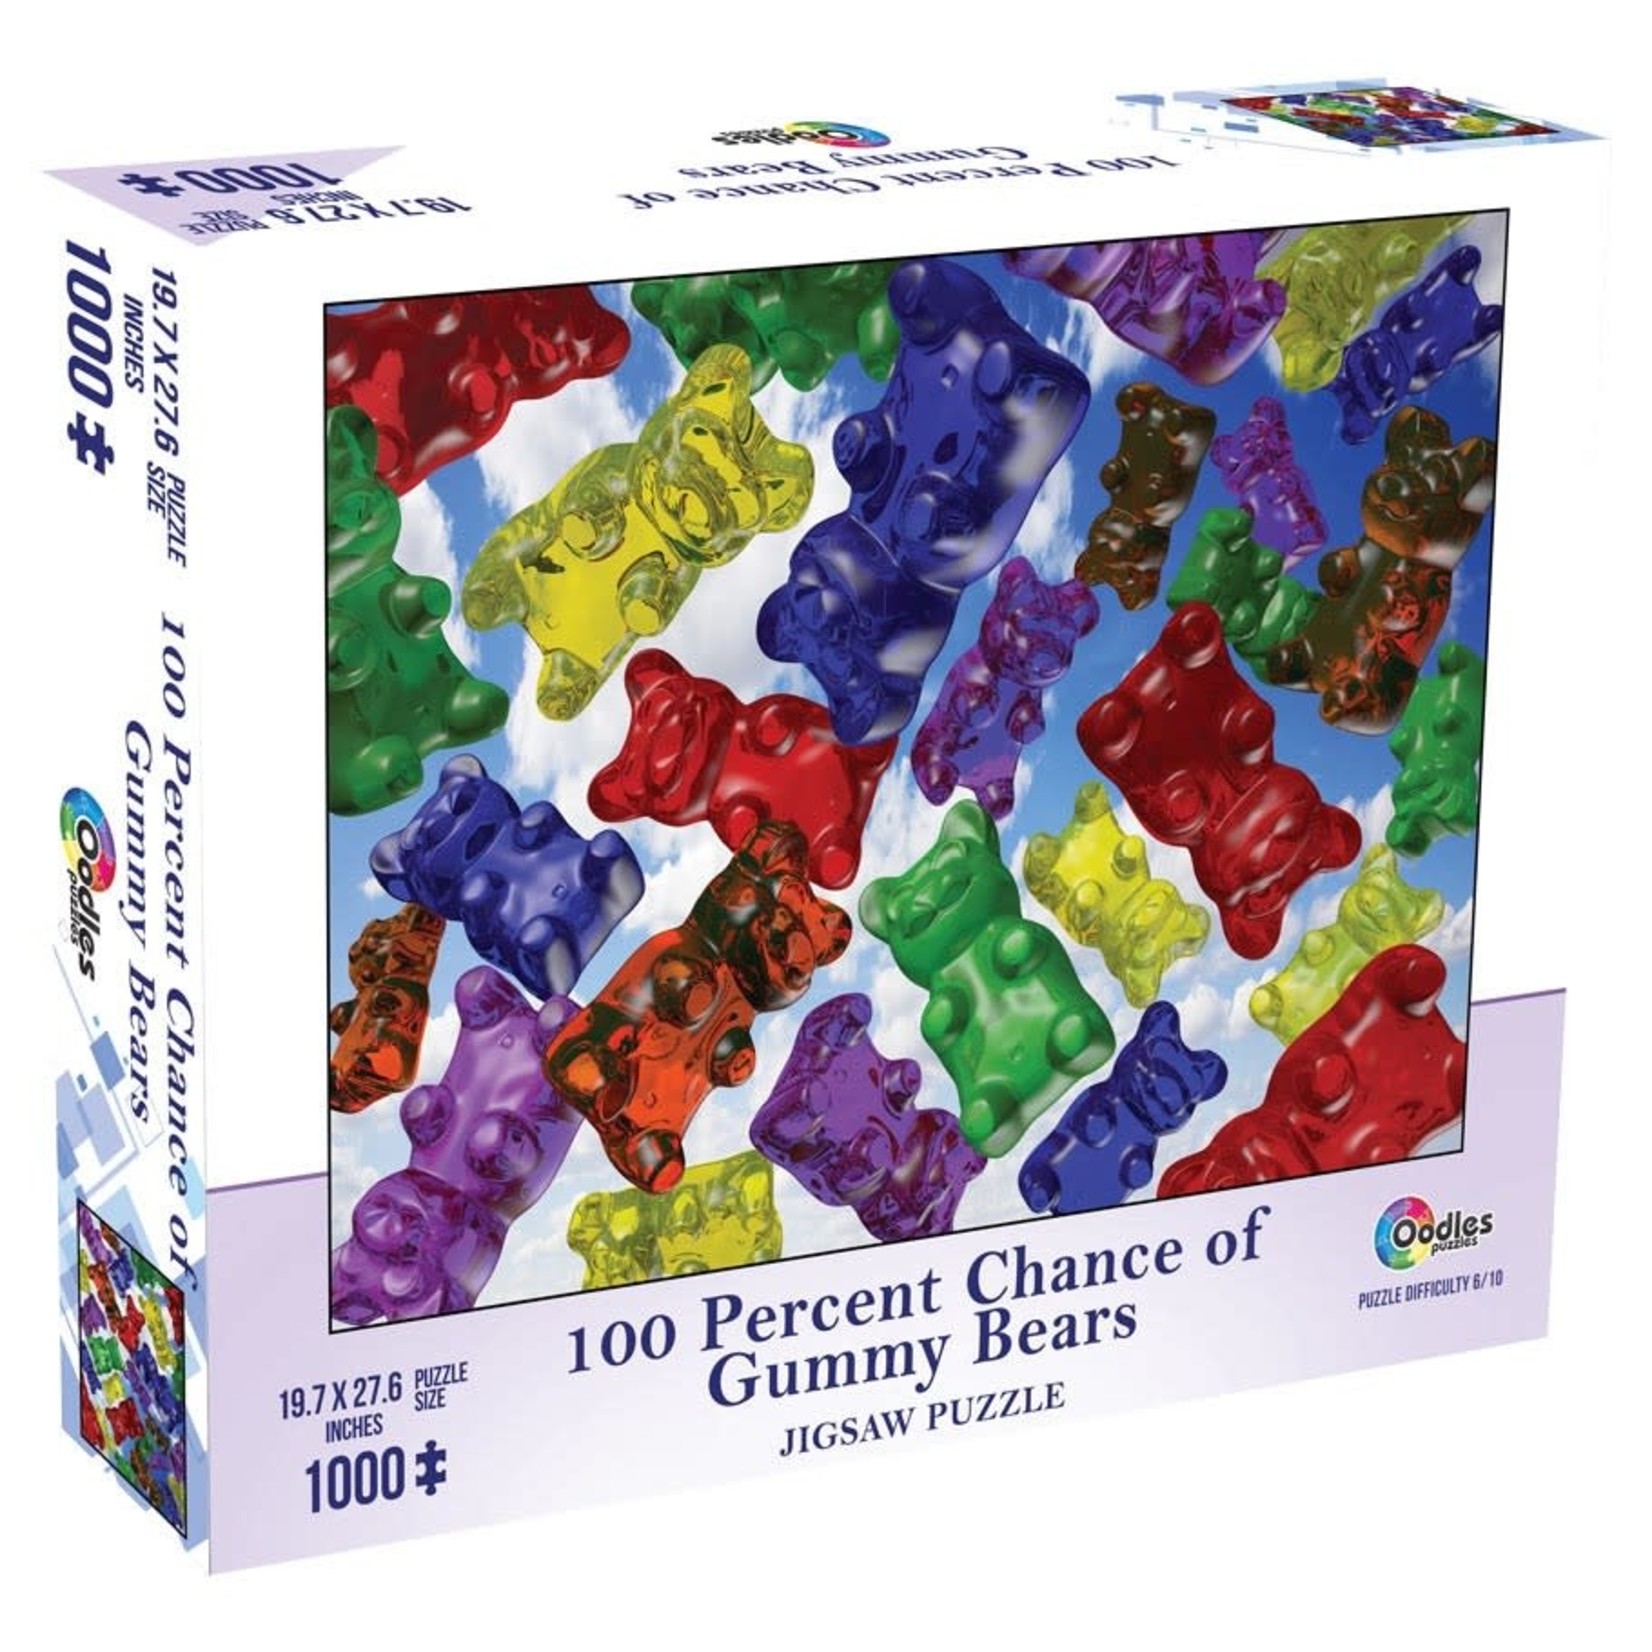 100% Chance of Gummy Bears 1000 Piece Puzzle